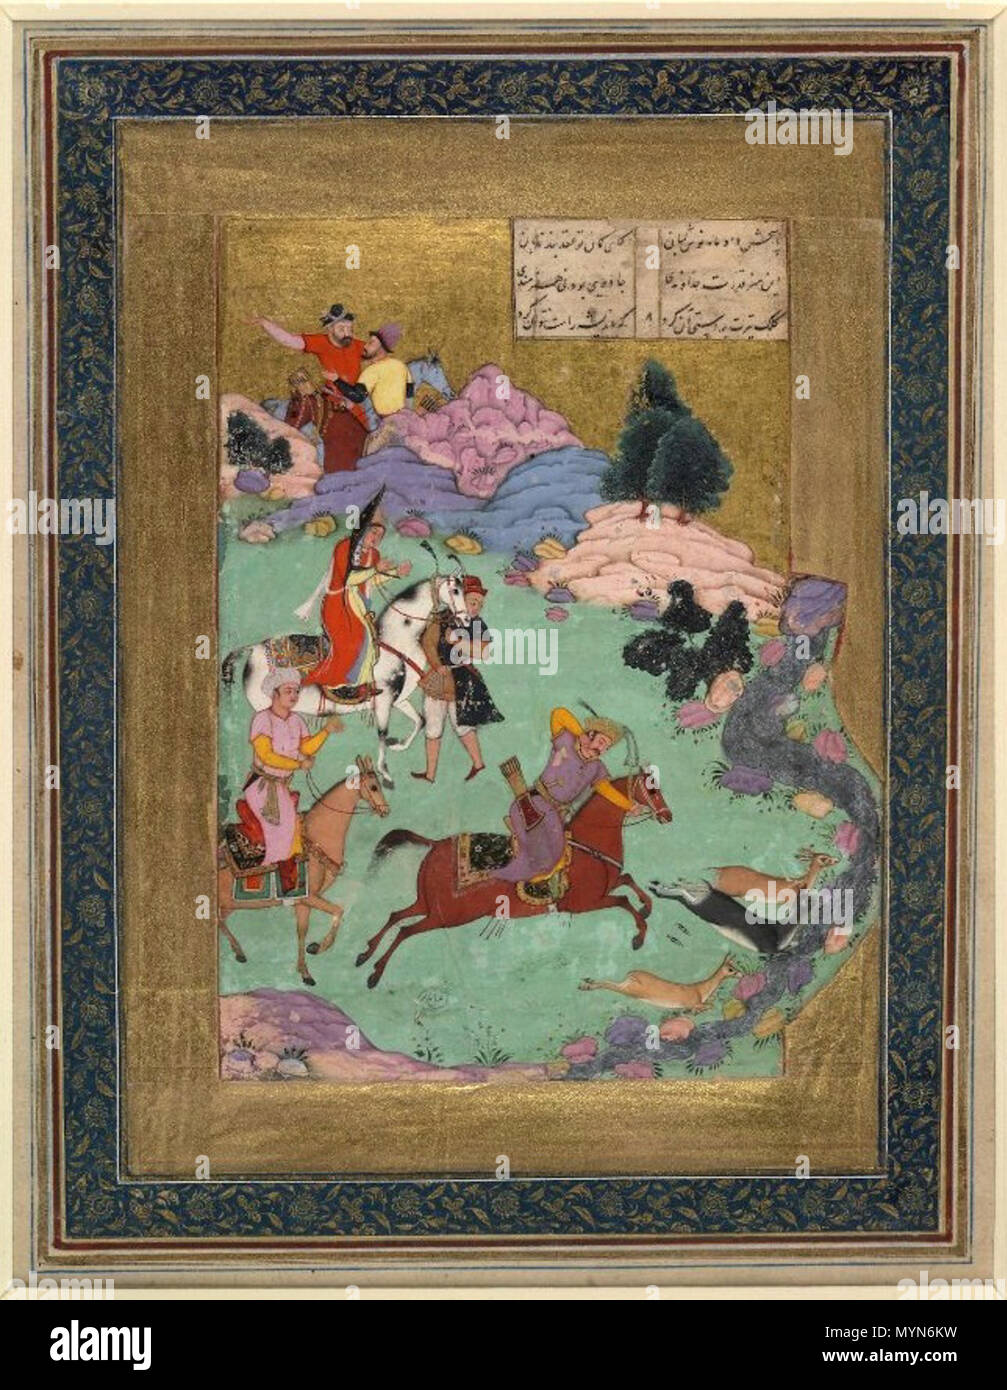 . English: Album leaf; painting depicts Bahram Gur (central figure) on horseback hunting three doe, from a Khamseh of Amir Khusrau Dihlavi. Behind the hunter stand two attendants on horseback, and one on foot. In the far distance two hunters stand behind a rocky hill. A stream, rocky hills, and minimal folliage decorate the background. Two columns, each composing of three lines of text, appear in the top right corner. Painted in opaque watercolours, gold leaf, and ink on paper. circa 1610. Amir Khusrau Dihlavi. 404 Painting depicts Bahram Gur (central figure) on horseback hunting three doe, fr Stock Photo